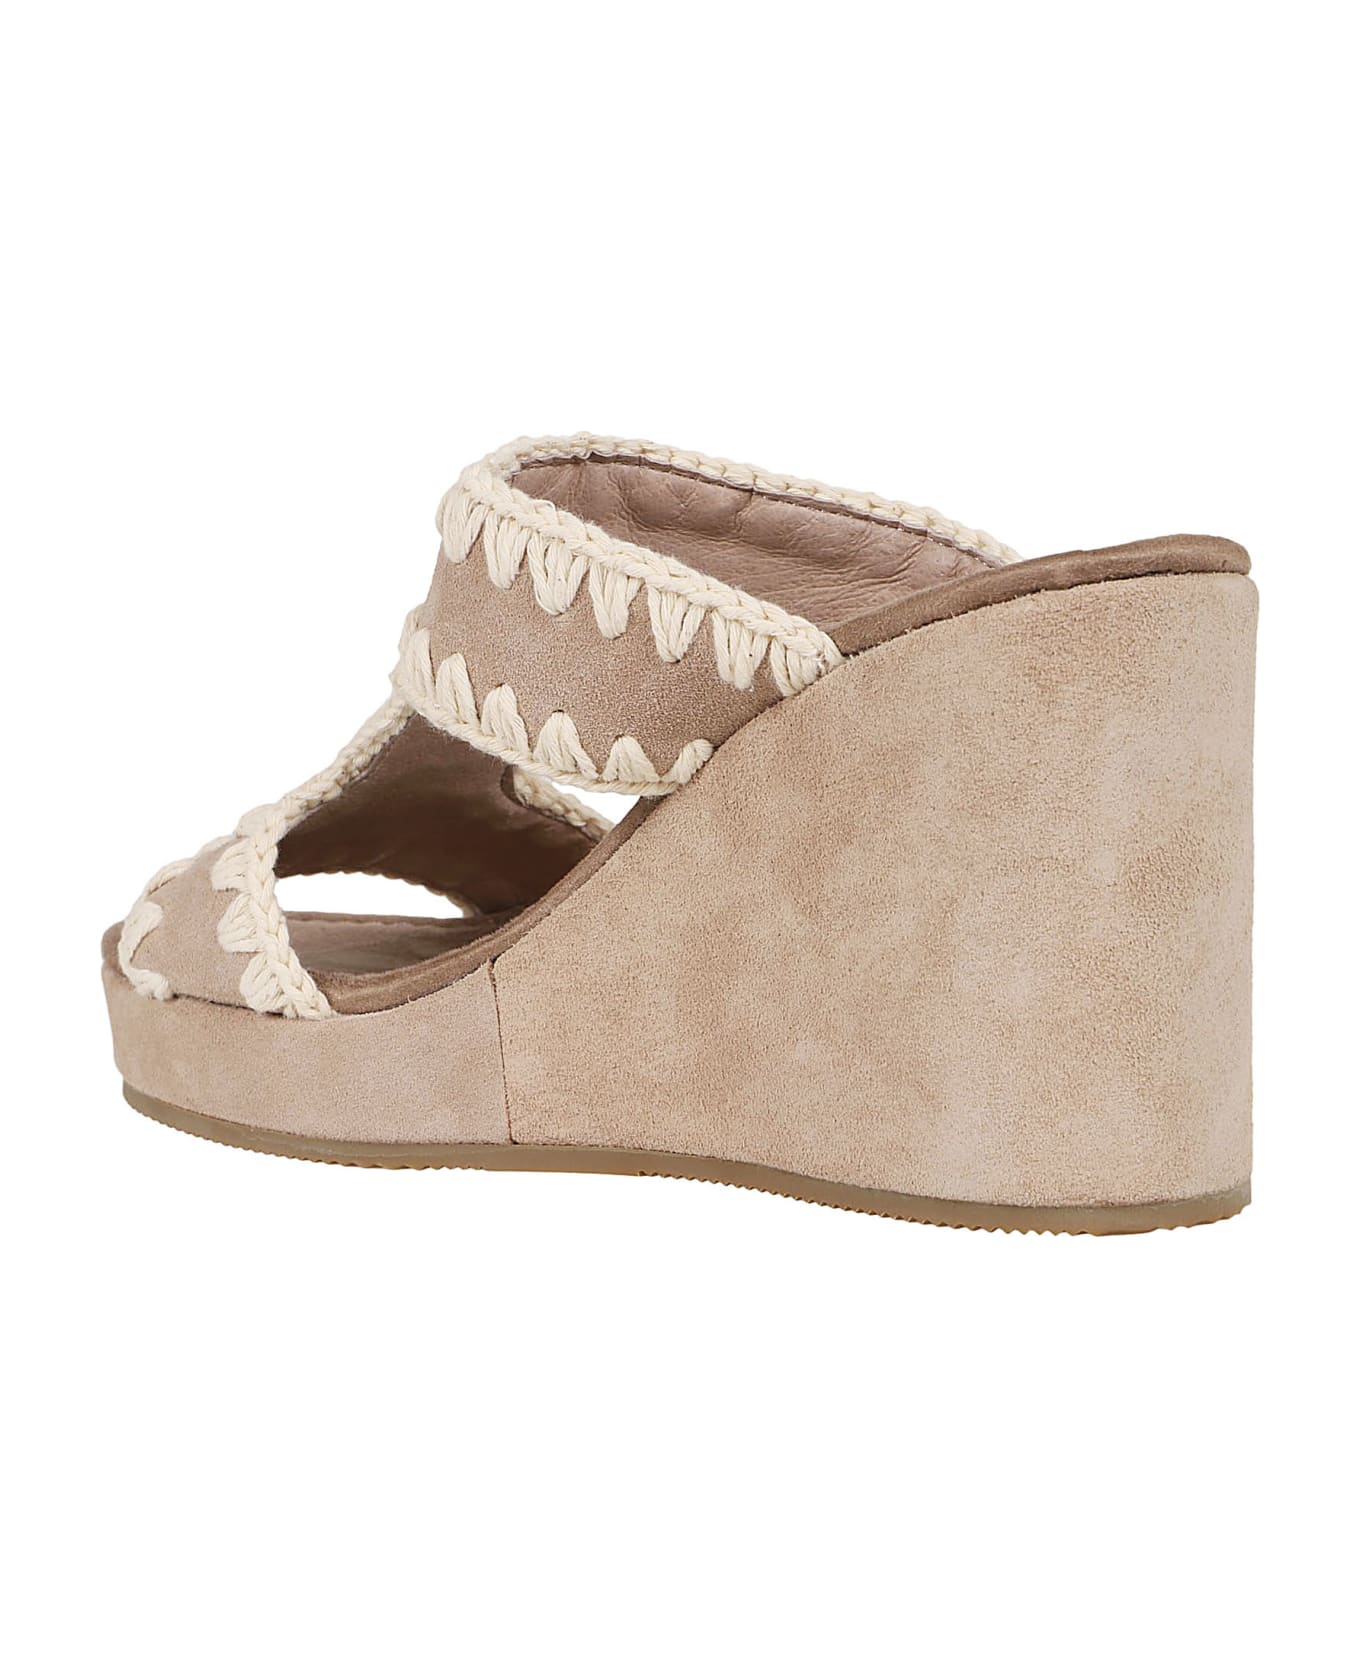 Mou Wedge Plain Suede - Psan Pink Sand